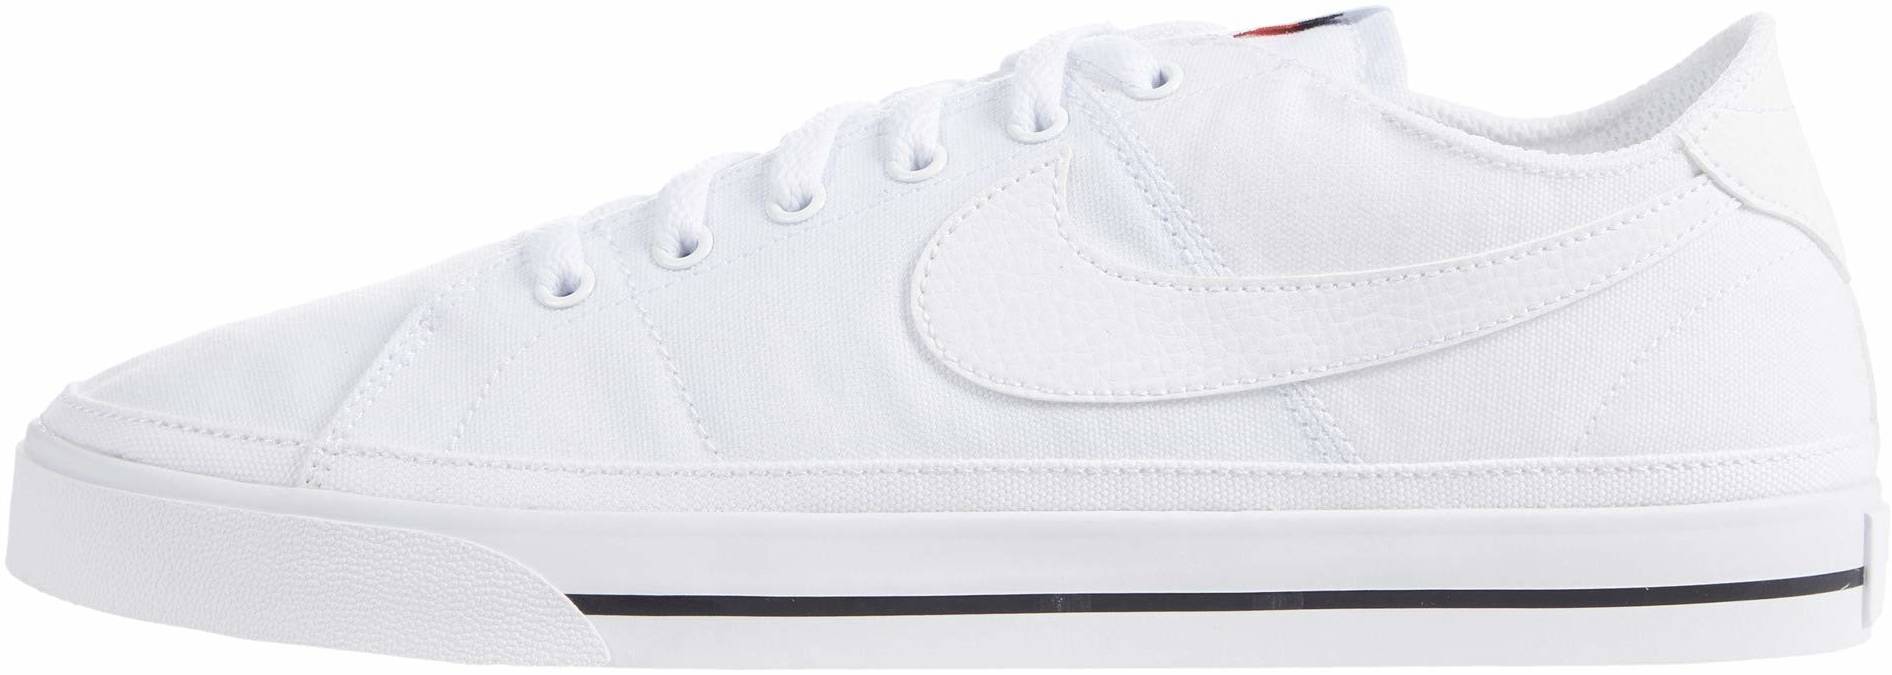 Nike Court Legacy Canvas sneakers in 9 colors (only $39) | RunRepeat